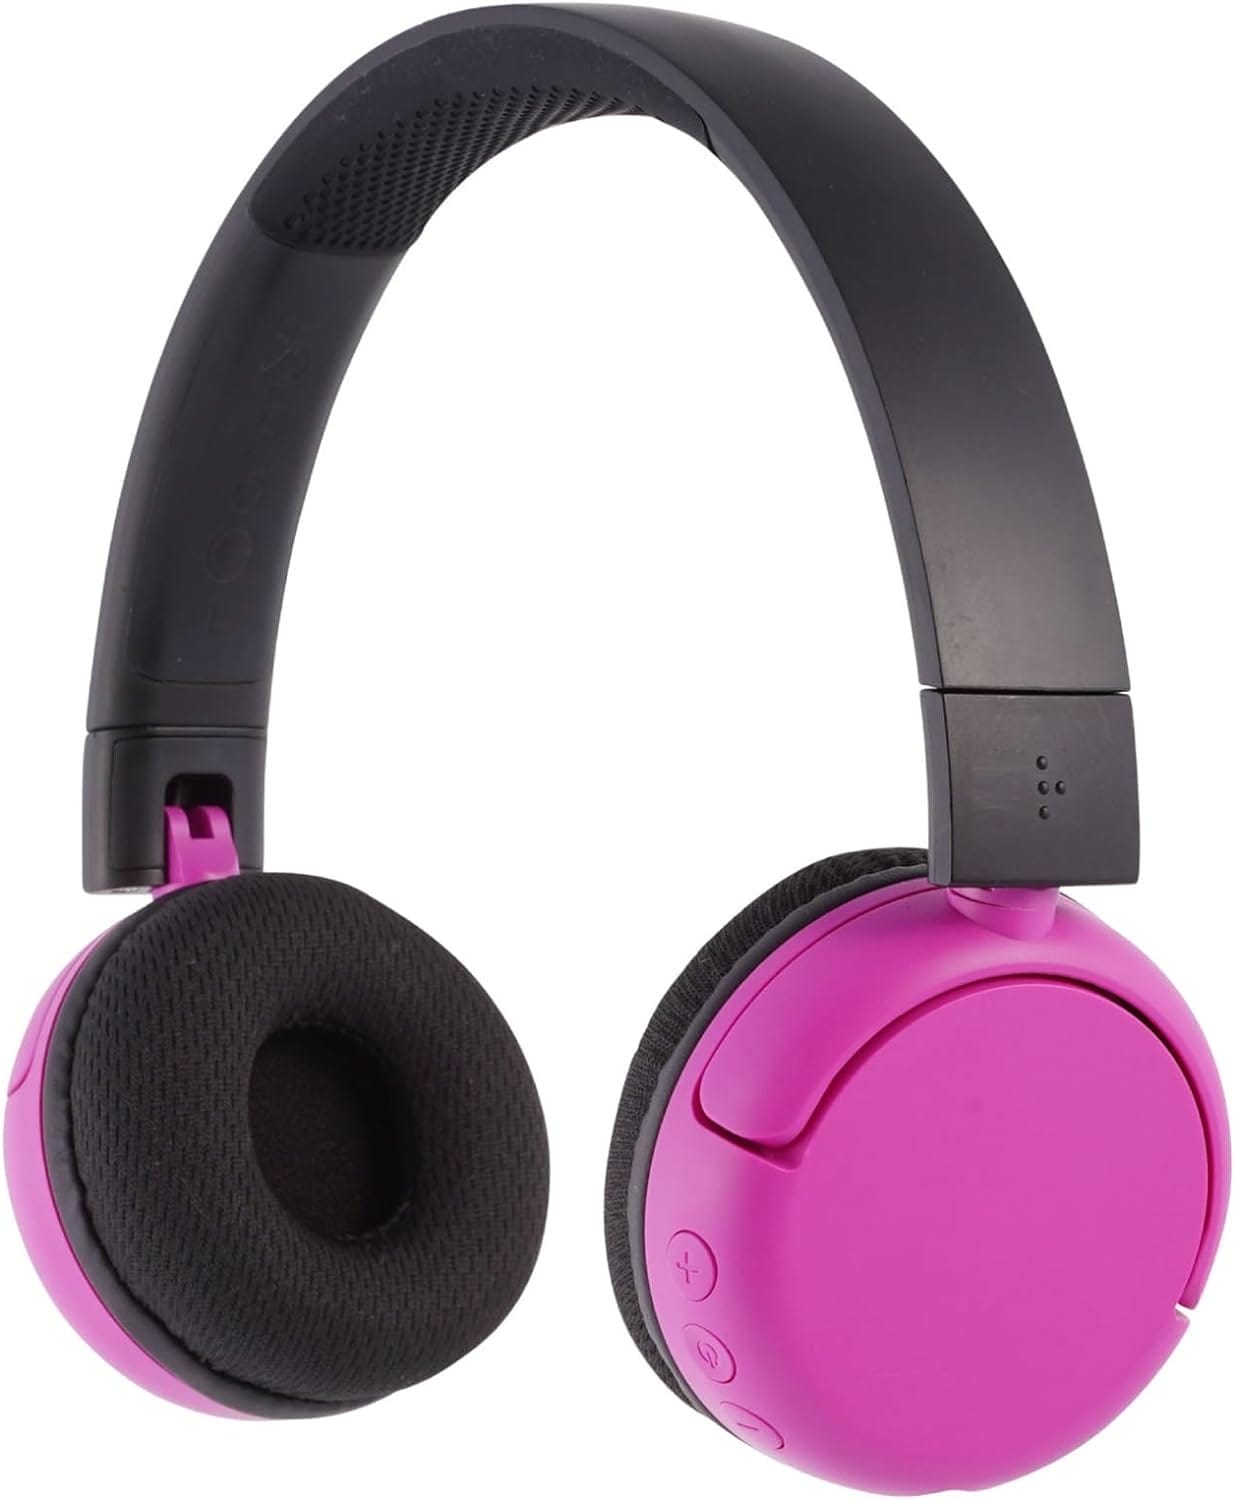 Read more about the article Made for Amazon Kids Bluetooth Headphones Review